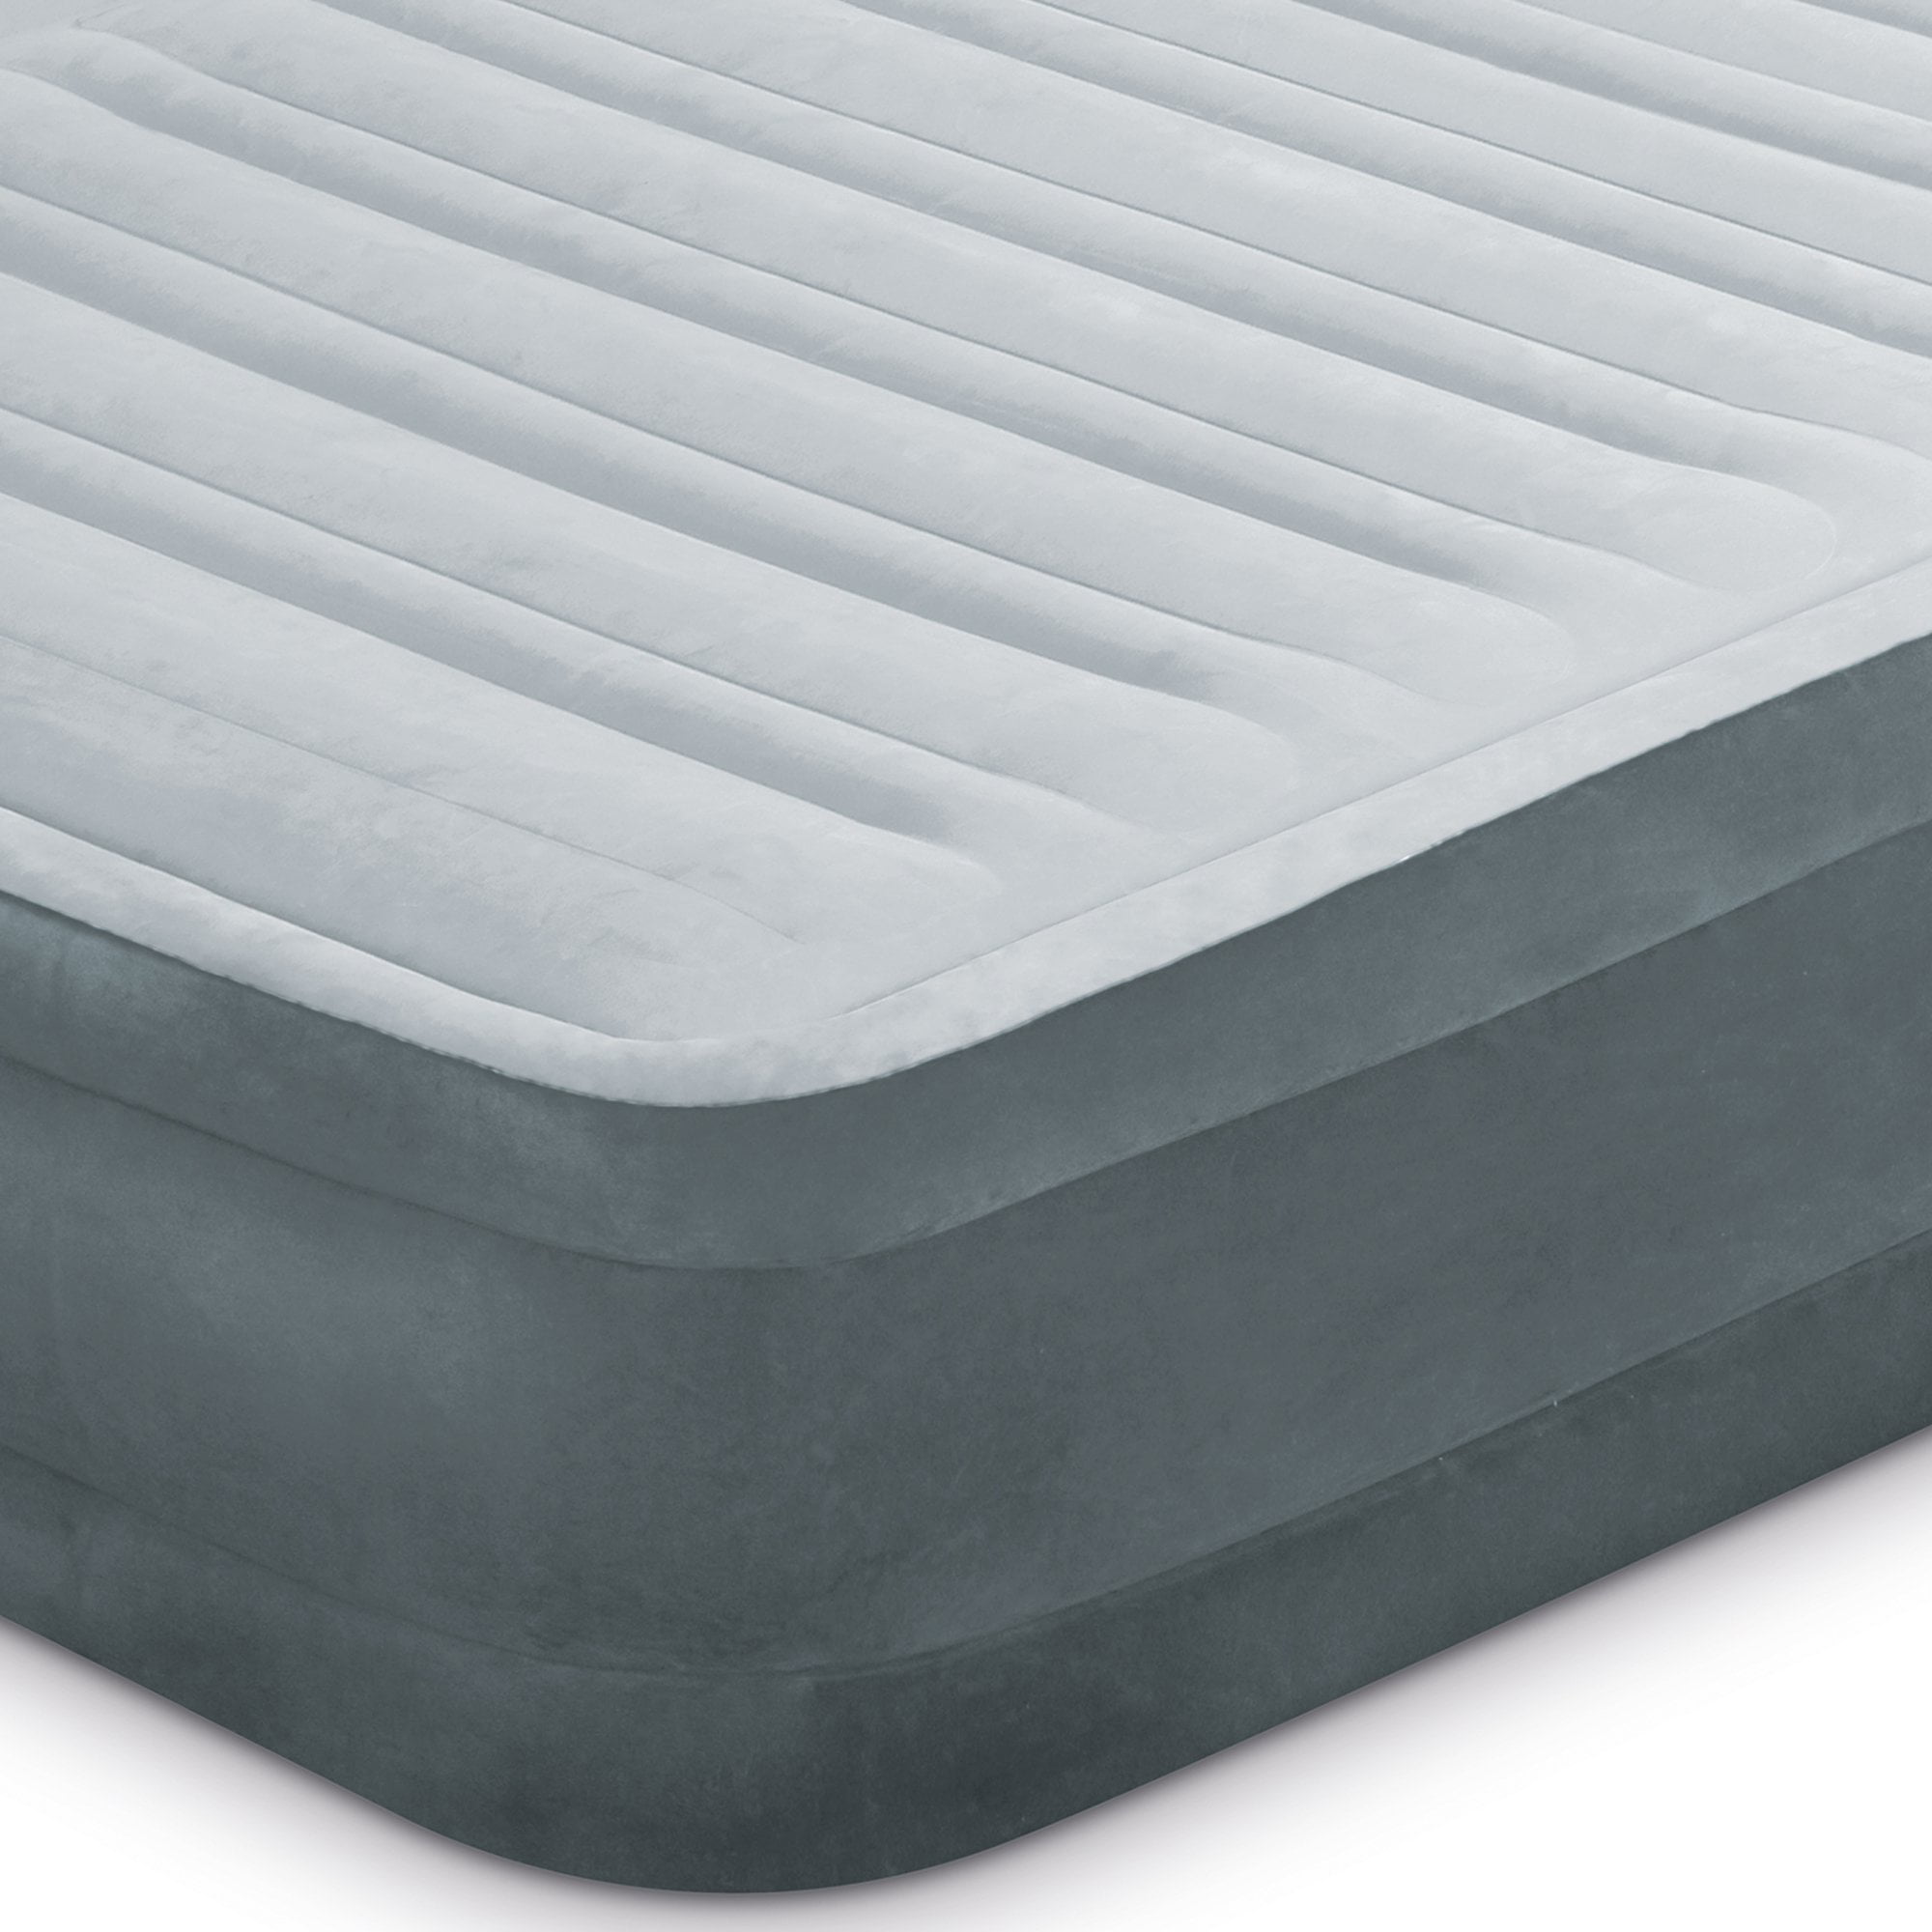 Details about   Intex Dura Beam Plus Series Mid Rise Queen Air Bed with Built In Pump 3 pack 